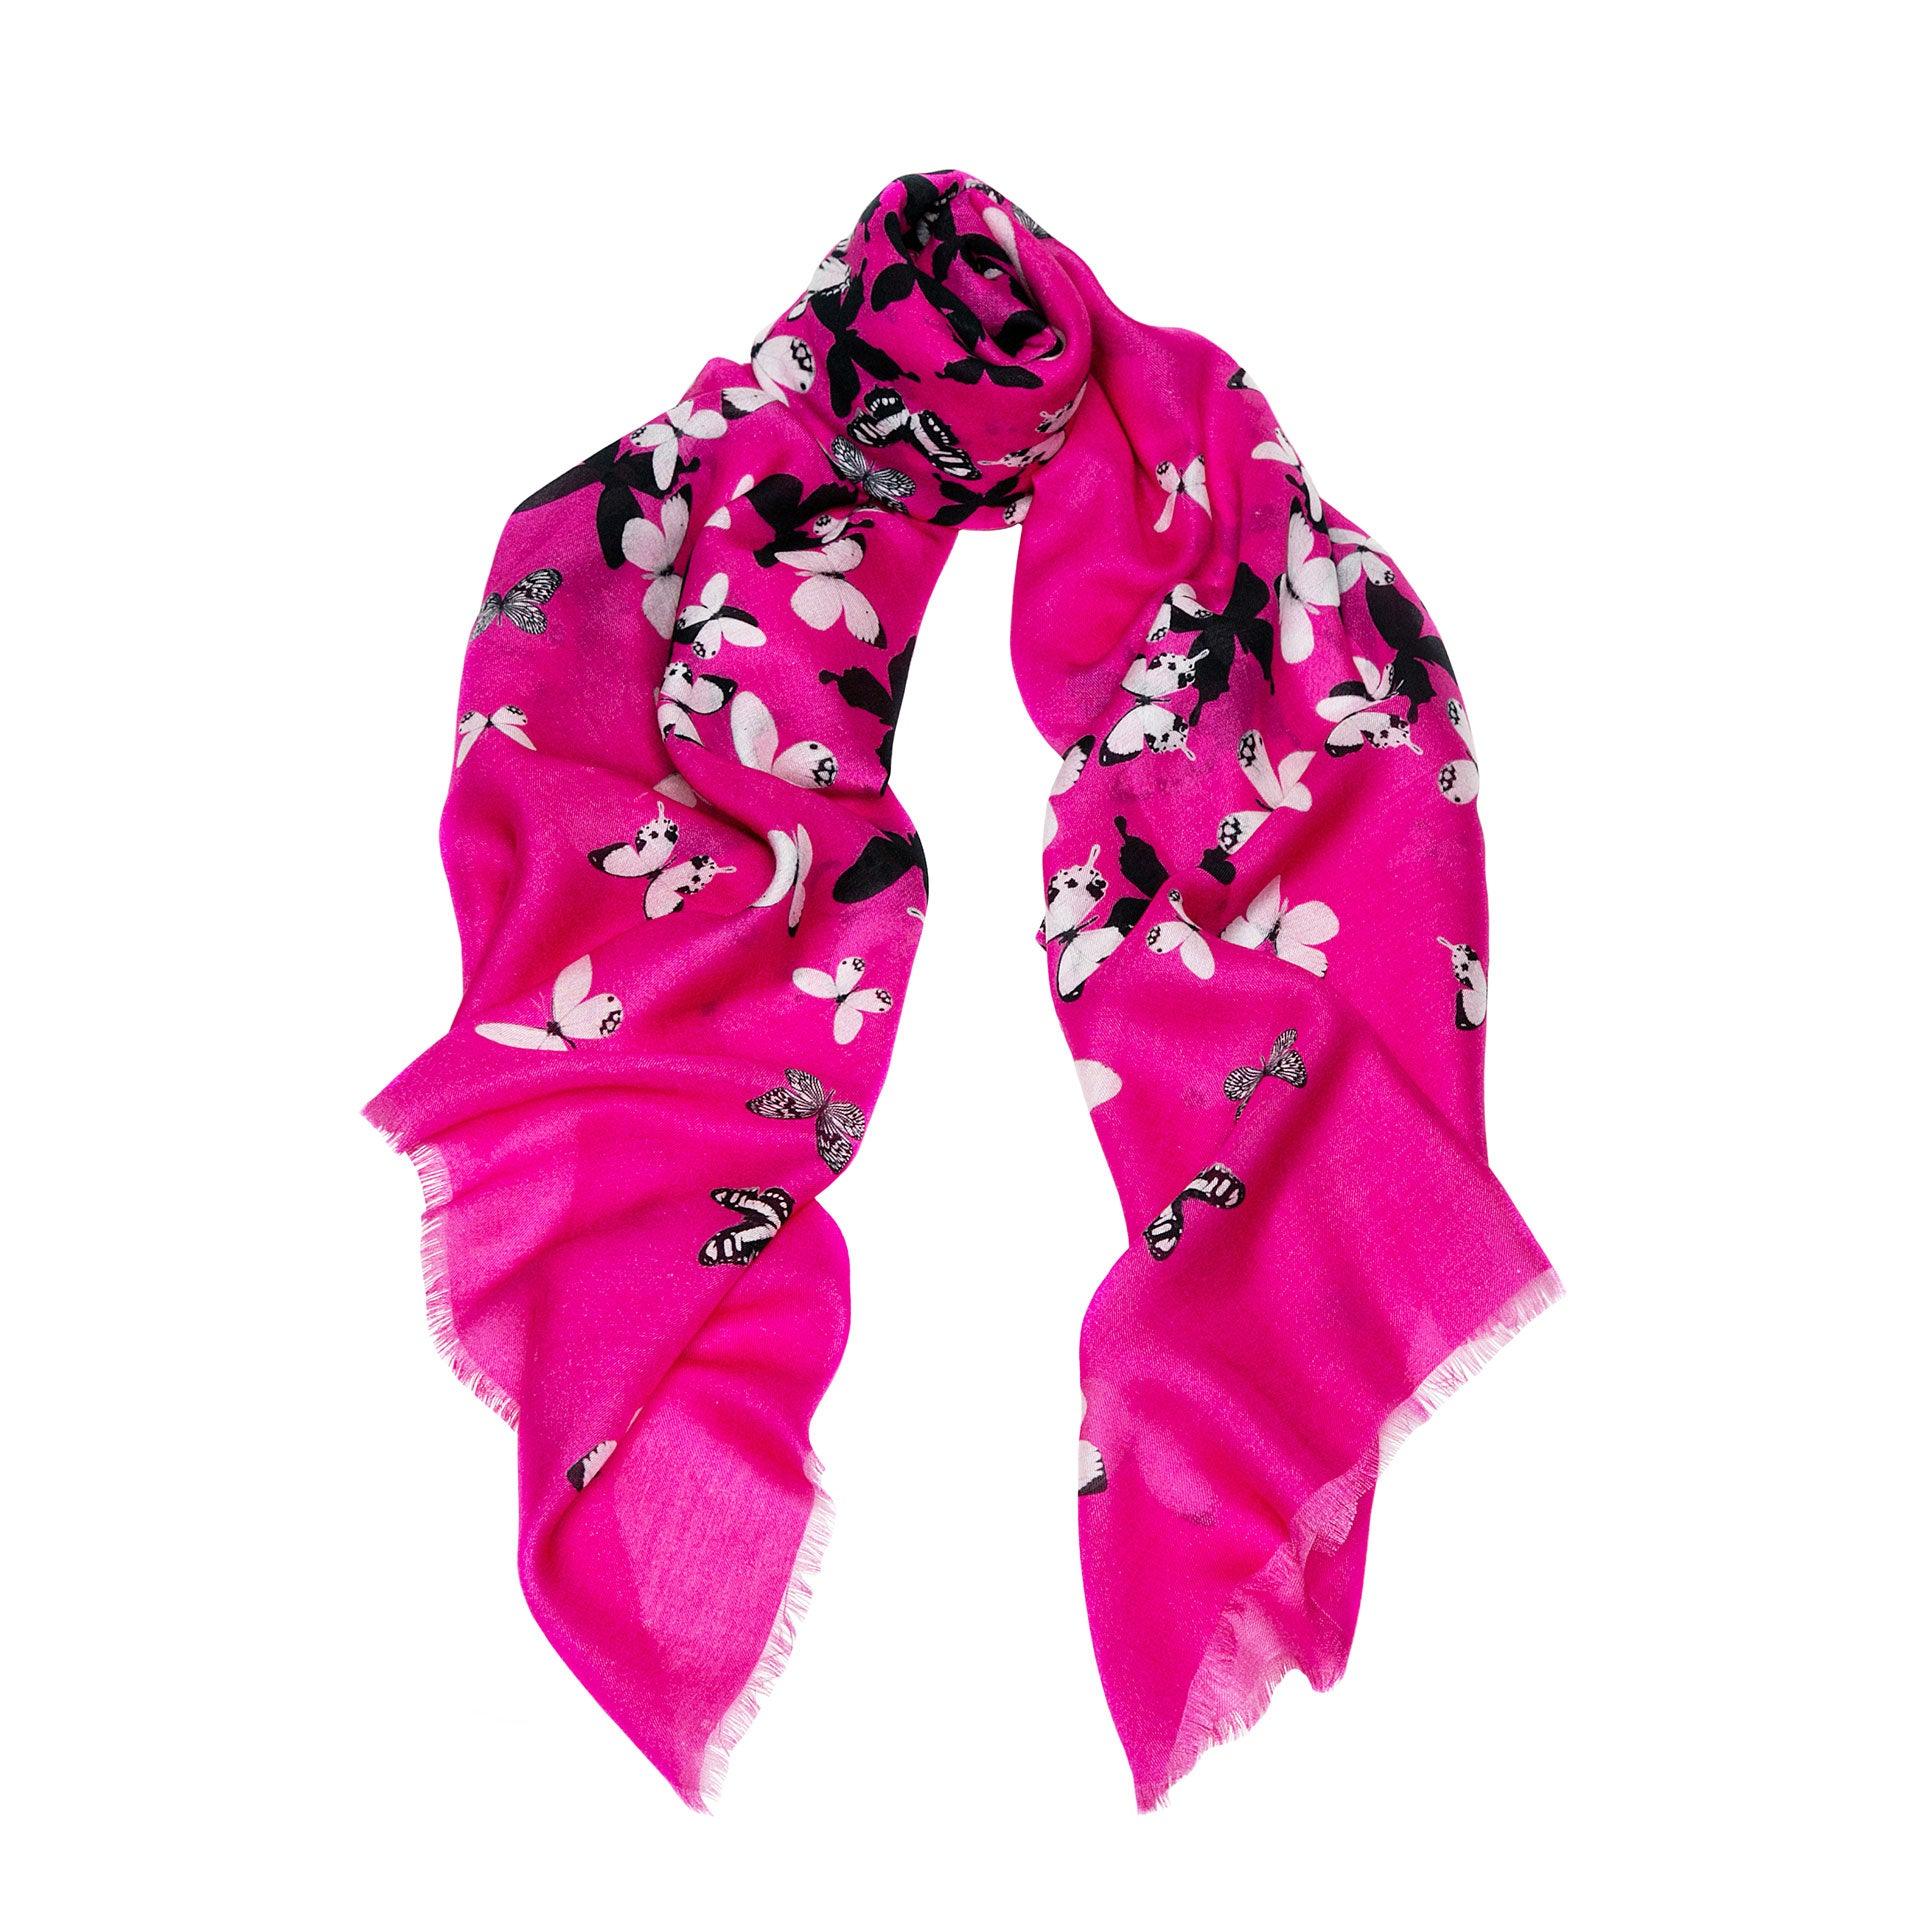 Fuchsia Pink Butterflies Cashmere Blend Scarf - Fusion of London's design and Italian craftsmanship, a luxurious gift choice.